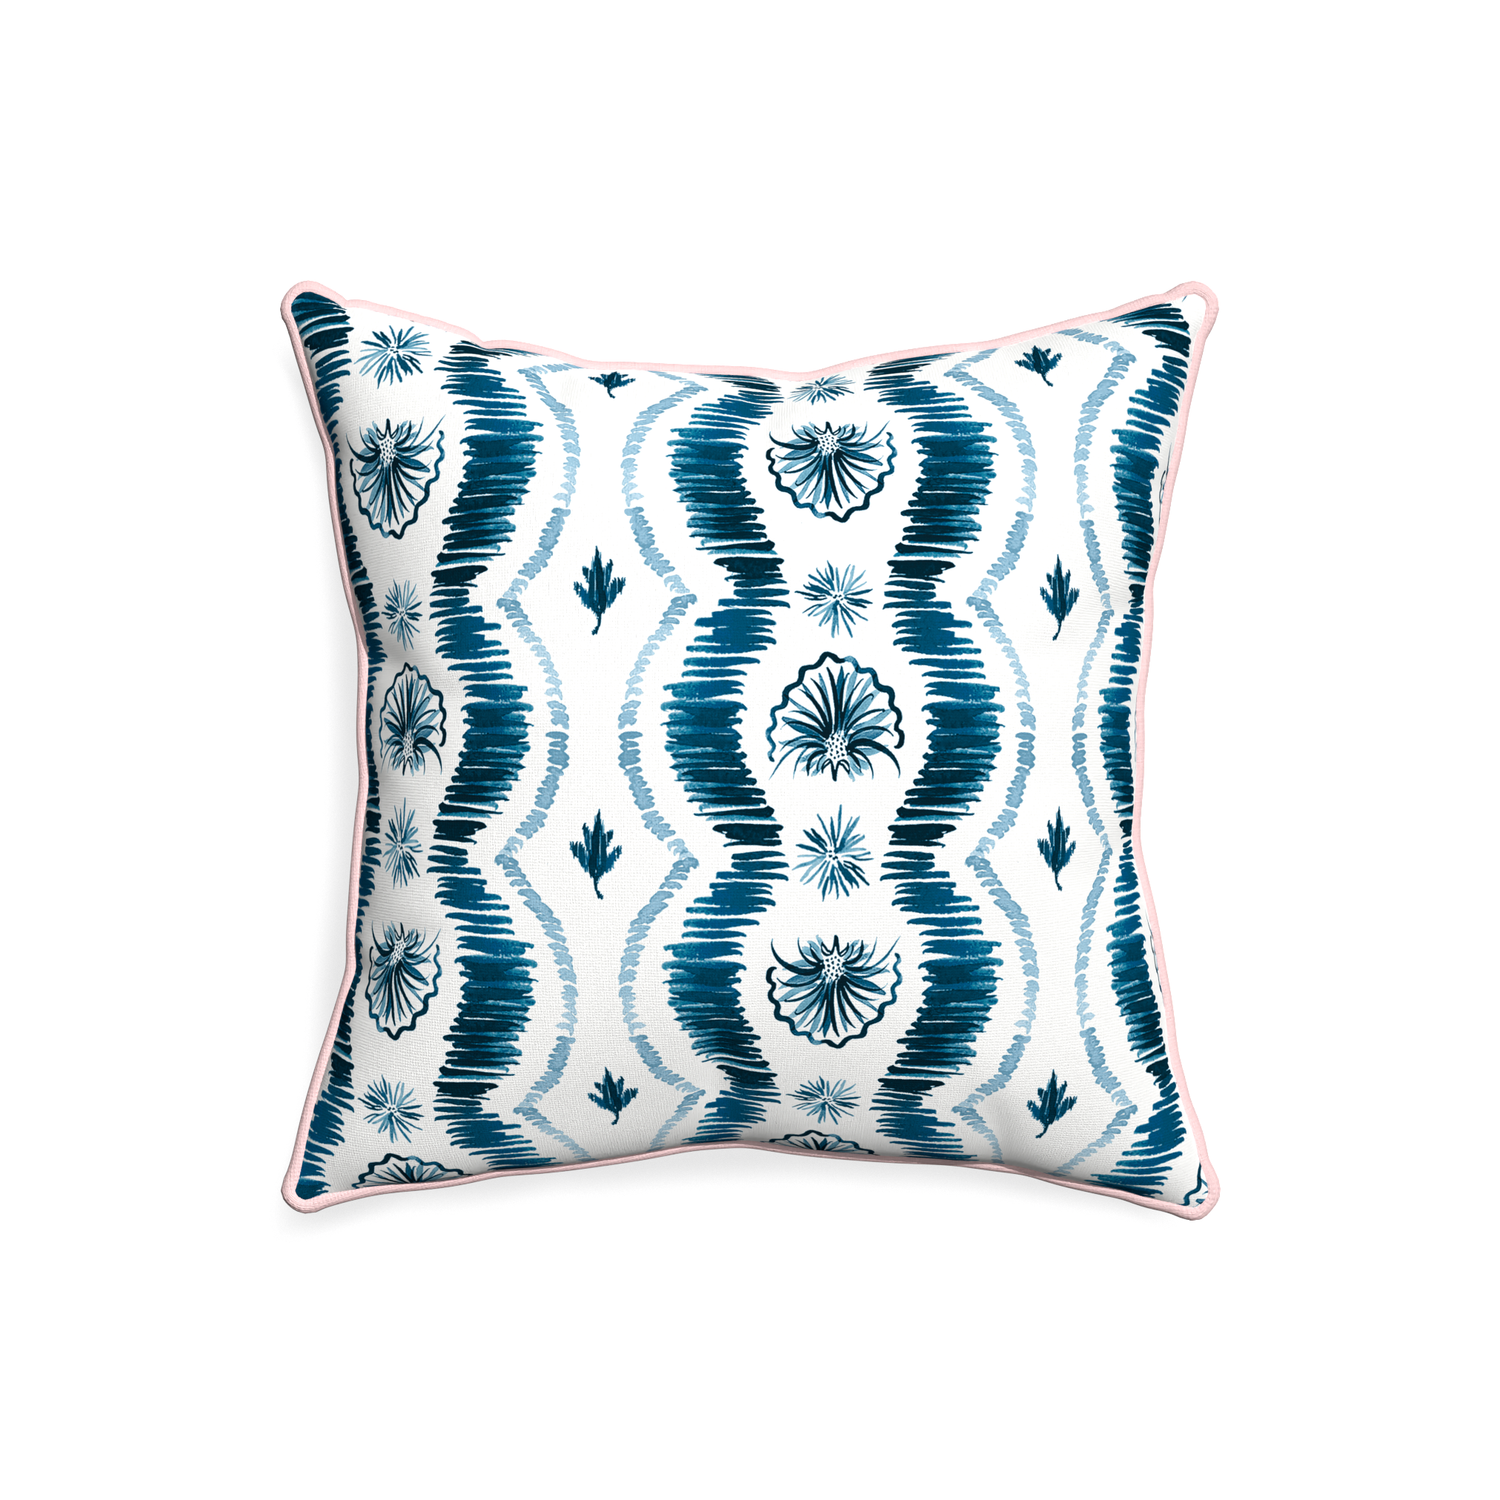 20-square alice custom blue ikatpillow with petal piping on white background